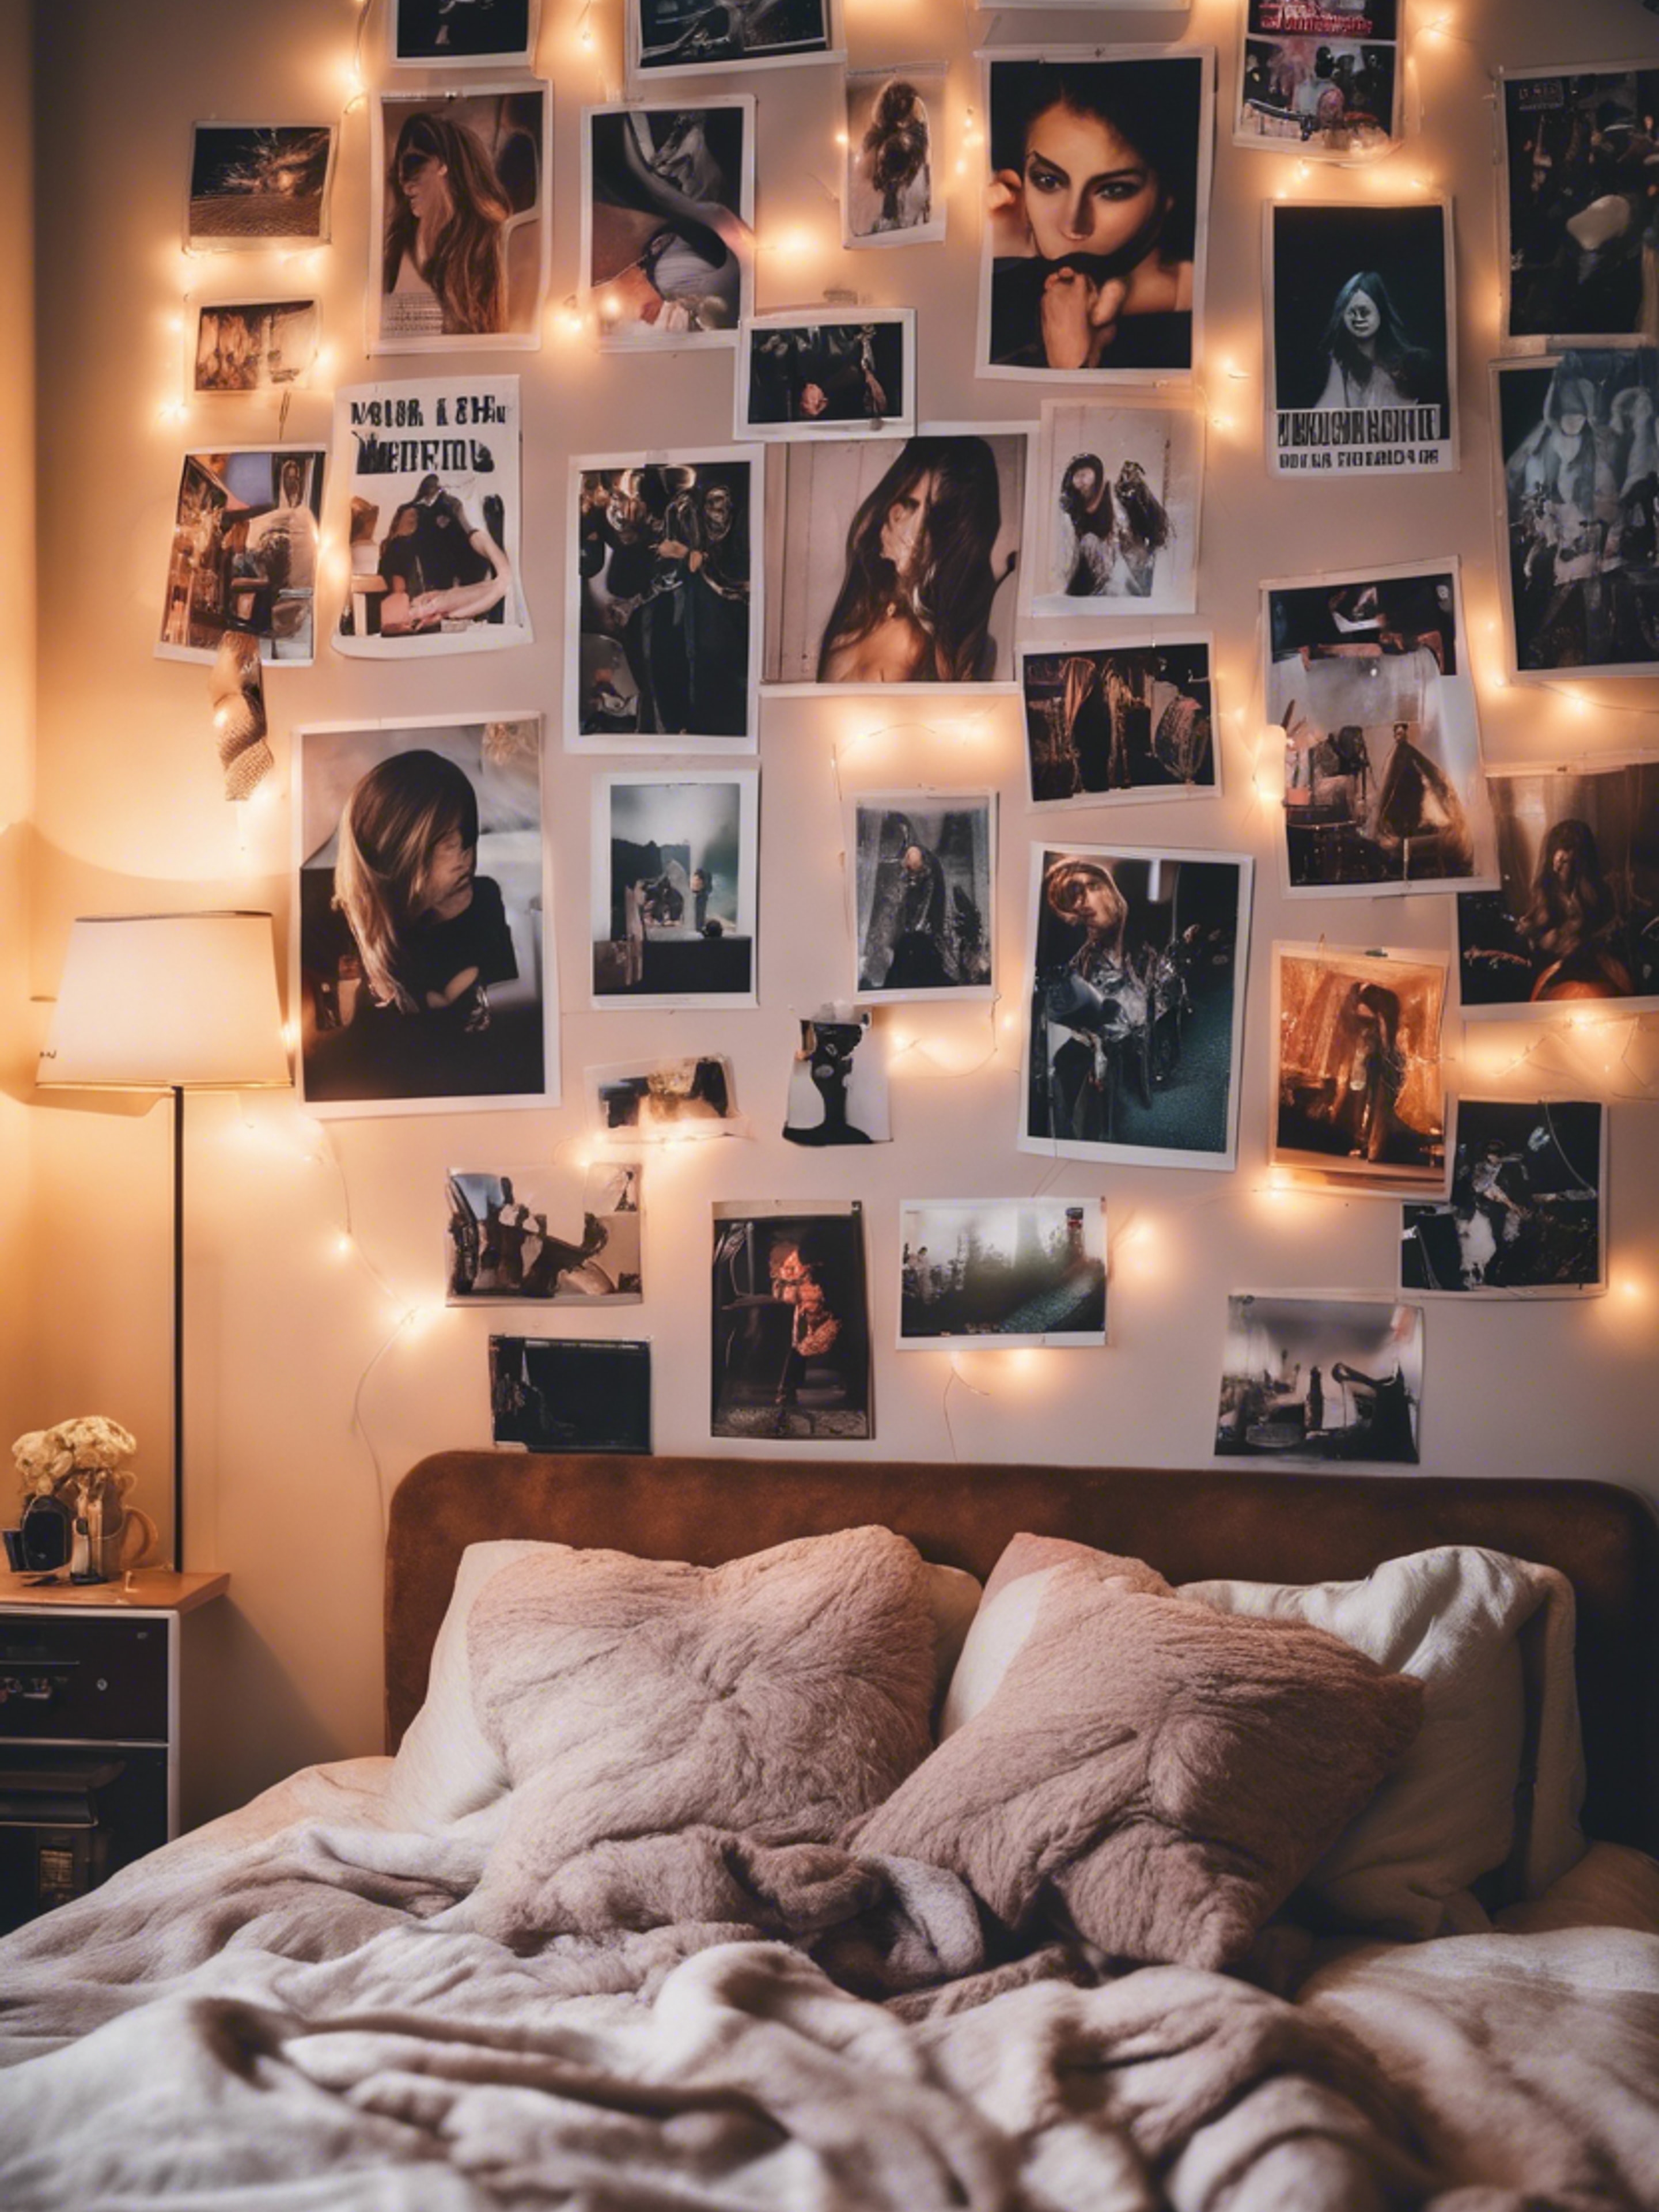 A modern and stylish teenage girl's room decorated with band posters, fairy lights, and polaroid pictures. Tapet[8dbab99d18ae495d873b]